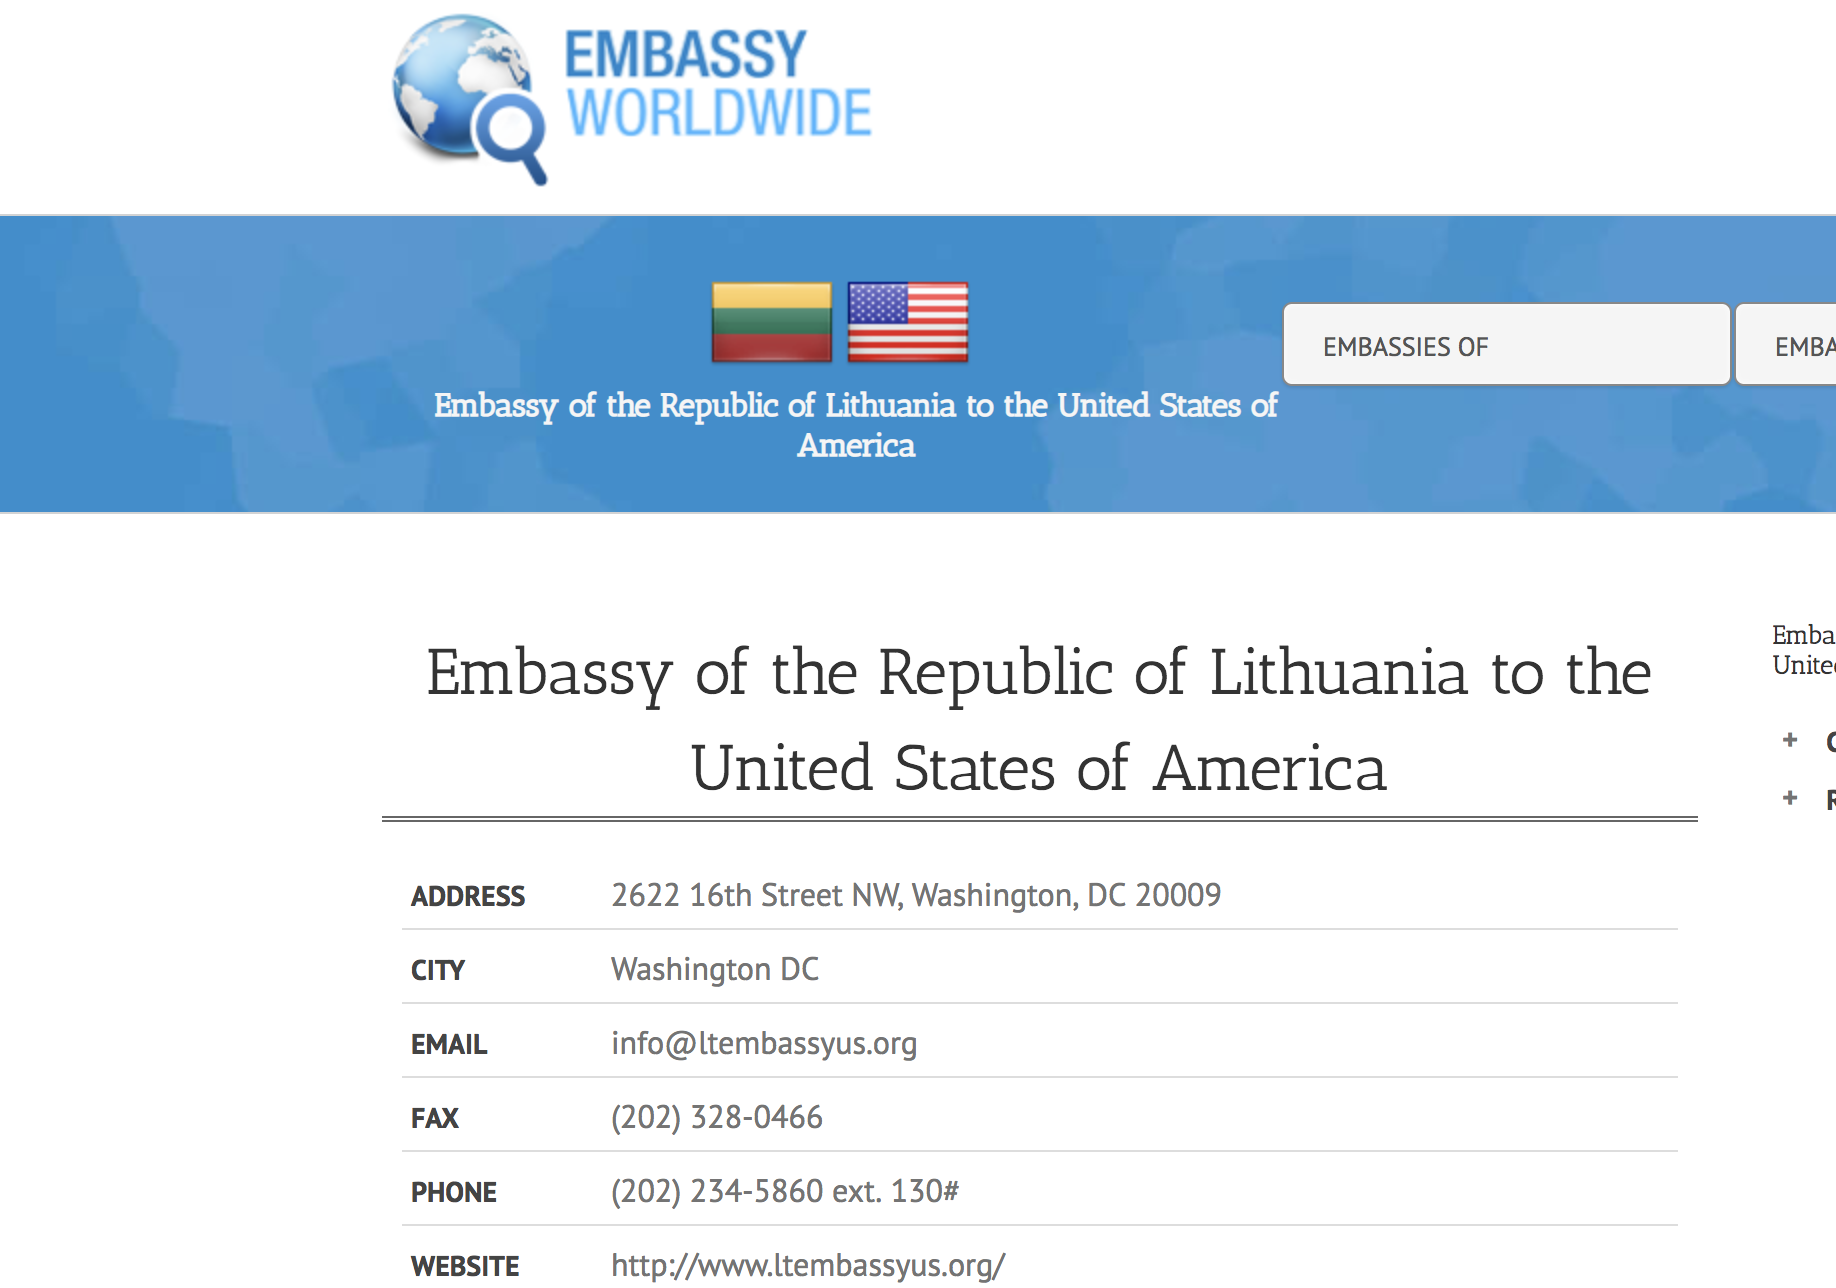 Embassy of the Republic of Lithuania to the USA